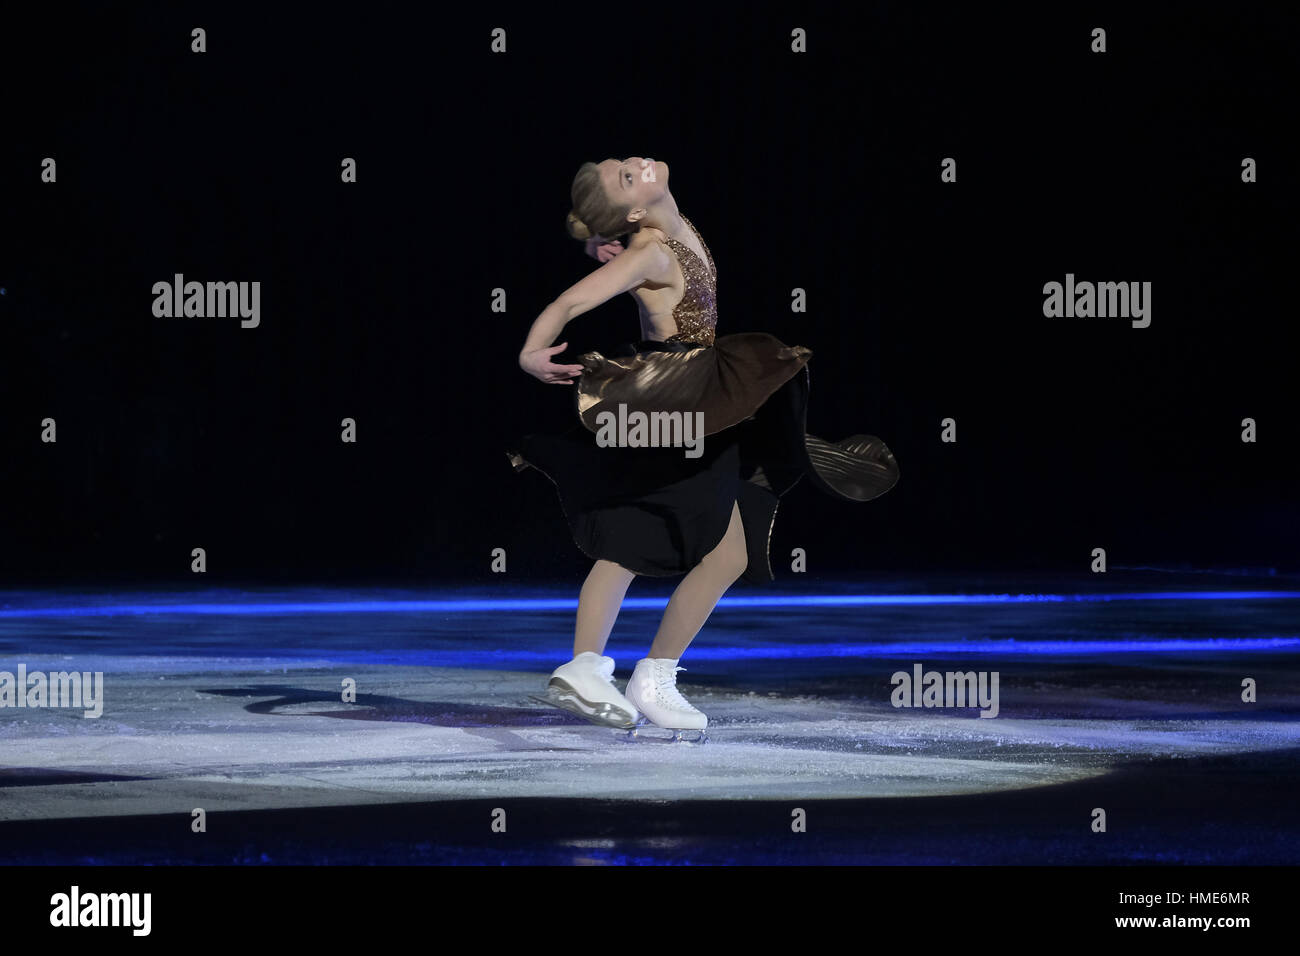 Performers take part in 'Revolution on Ice' at Vista Alegre Palace in Madrid, Spain  Featuring: Kiira Korpi Where: Madrid, Spain When: 01 Jan 2017 Credit: Oscar Gonzalez/WENN.com Stock Photo